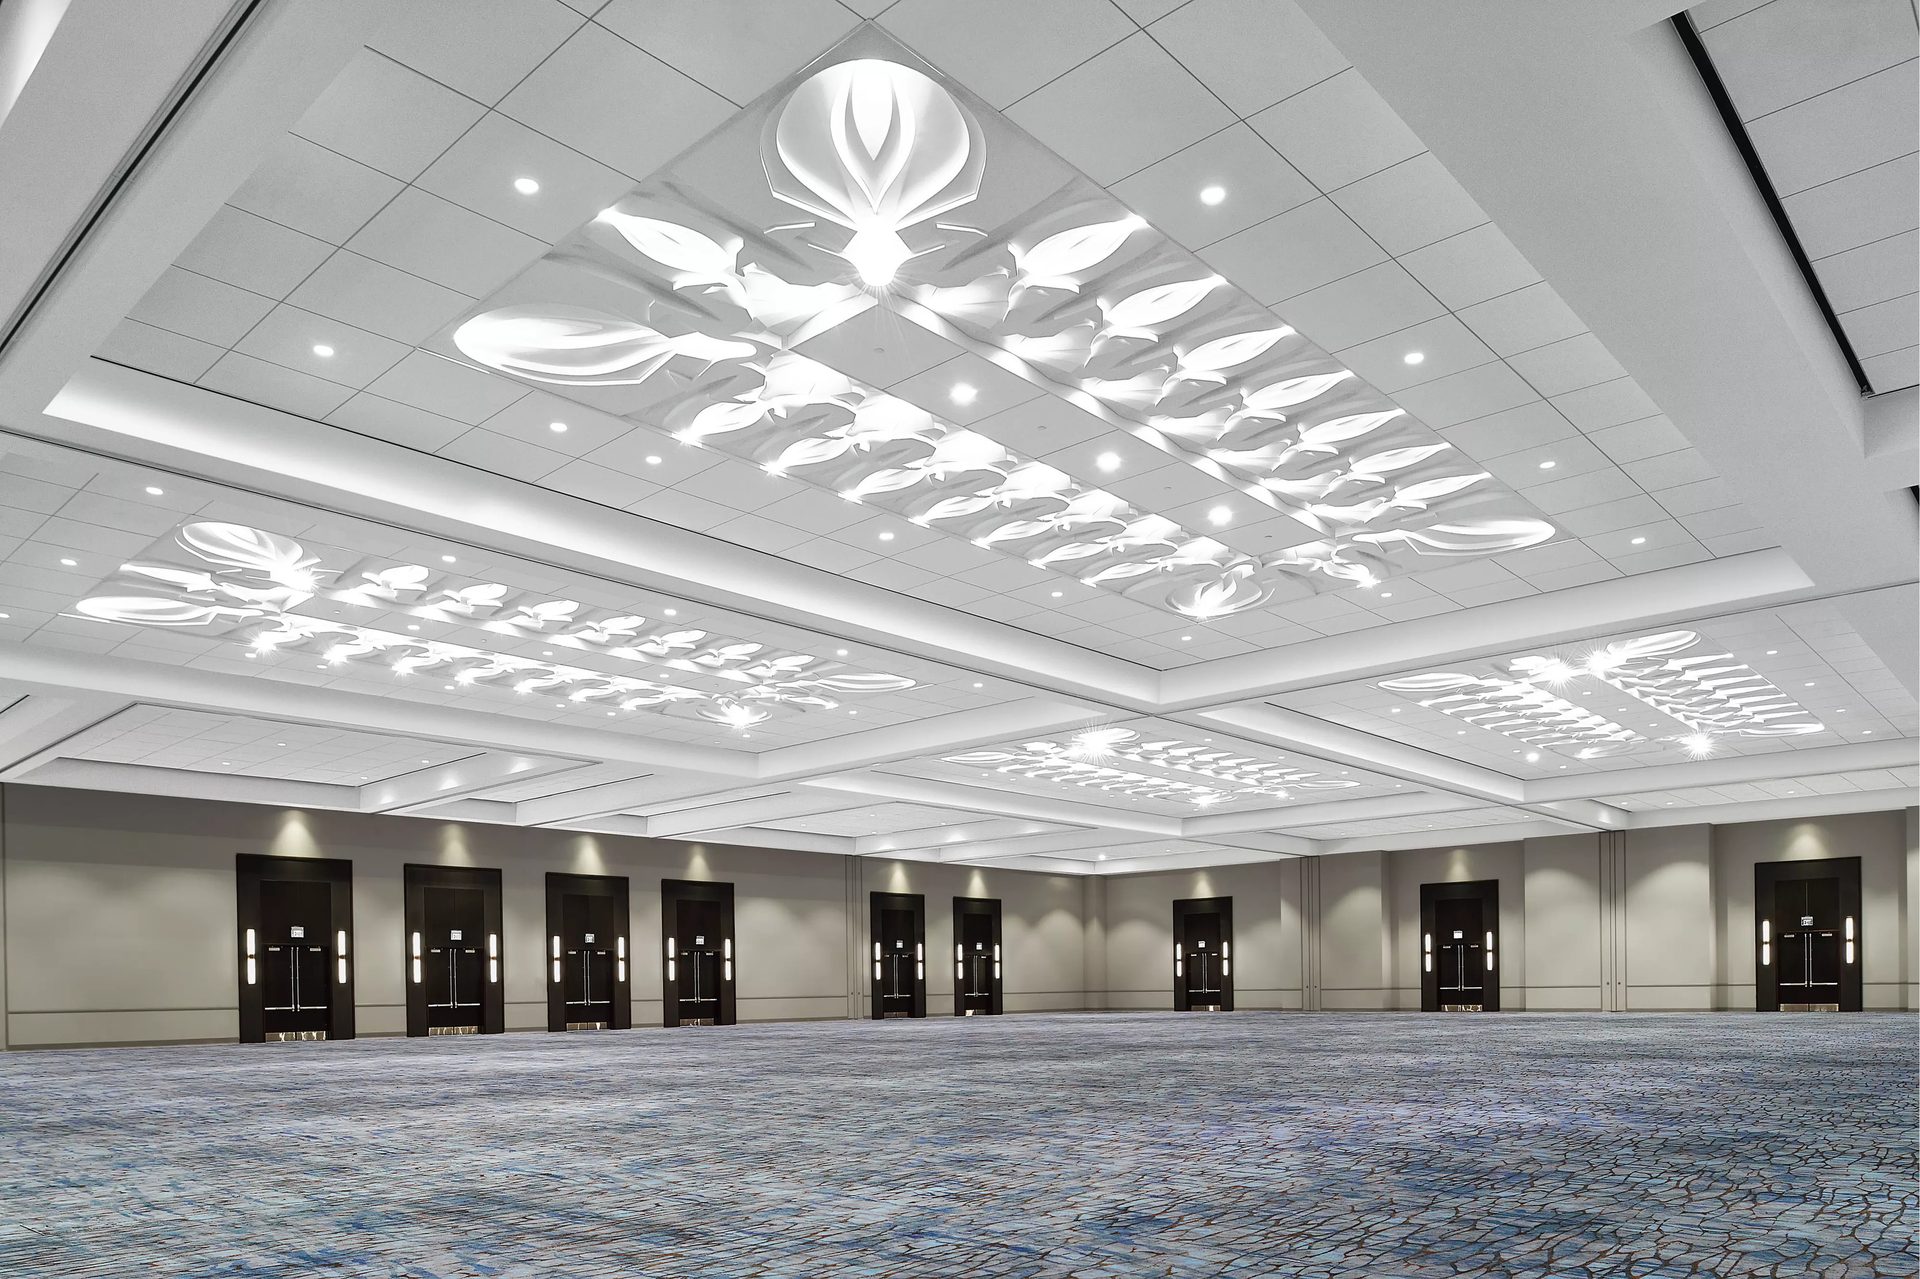 Interior ceiling design of Cherokee Casino and Convention Center